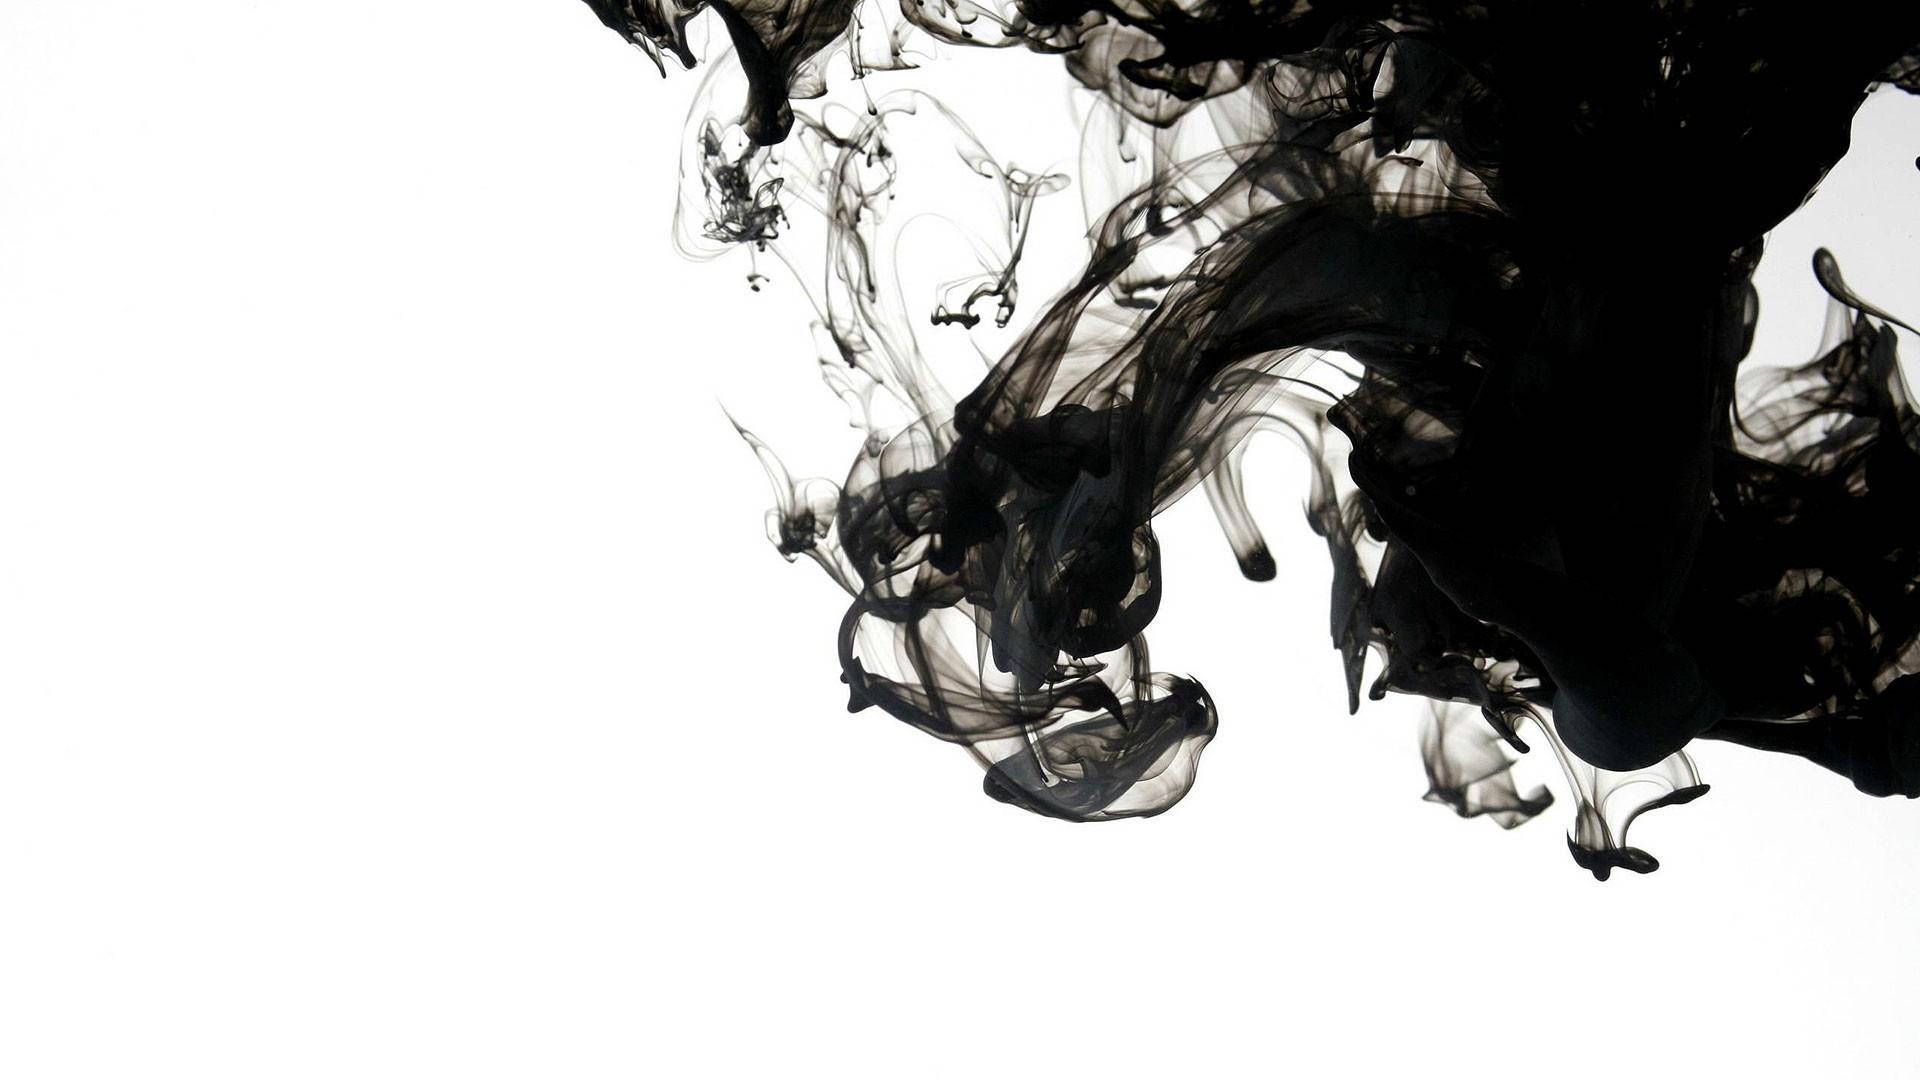 Black and White Abstract Wallpaper background picture